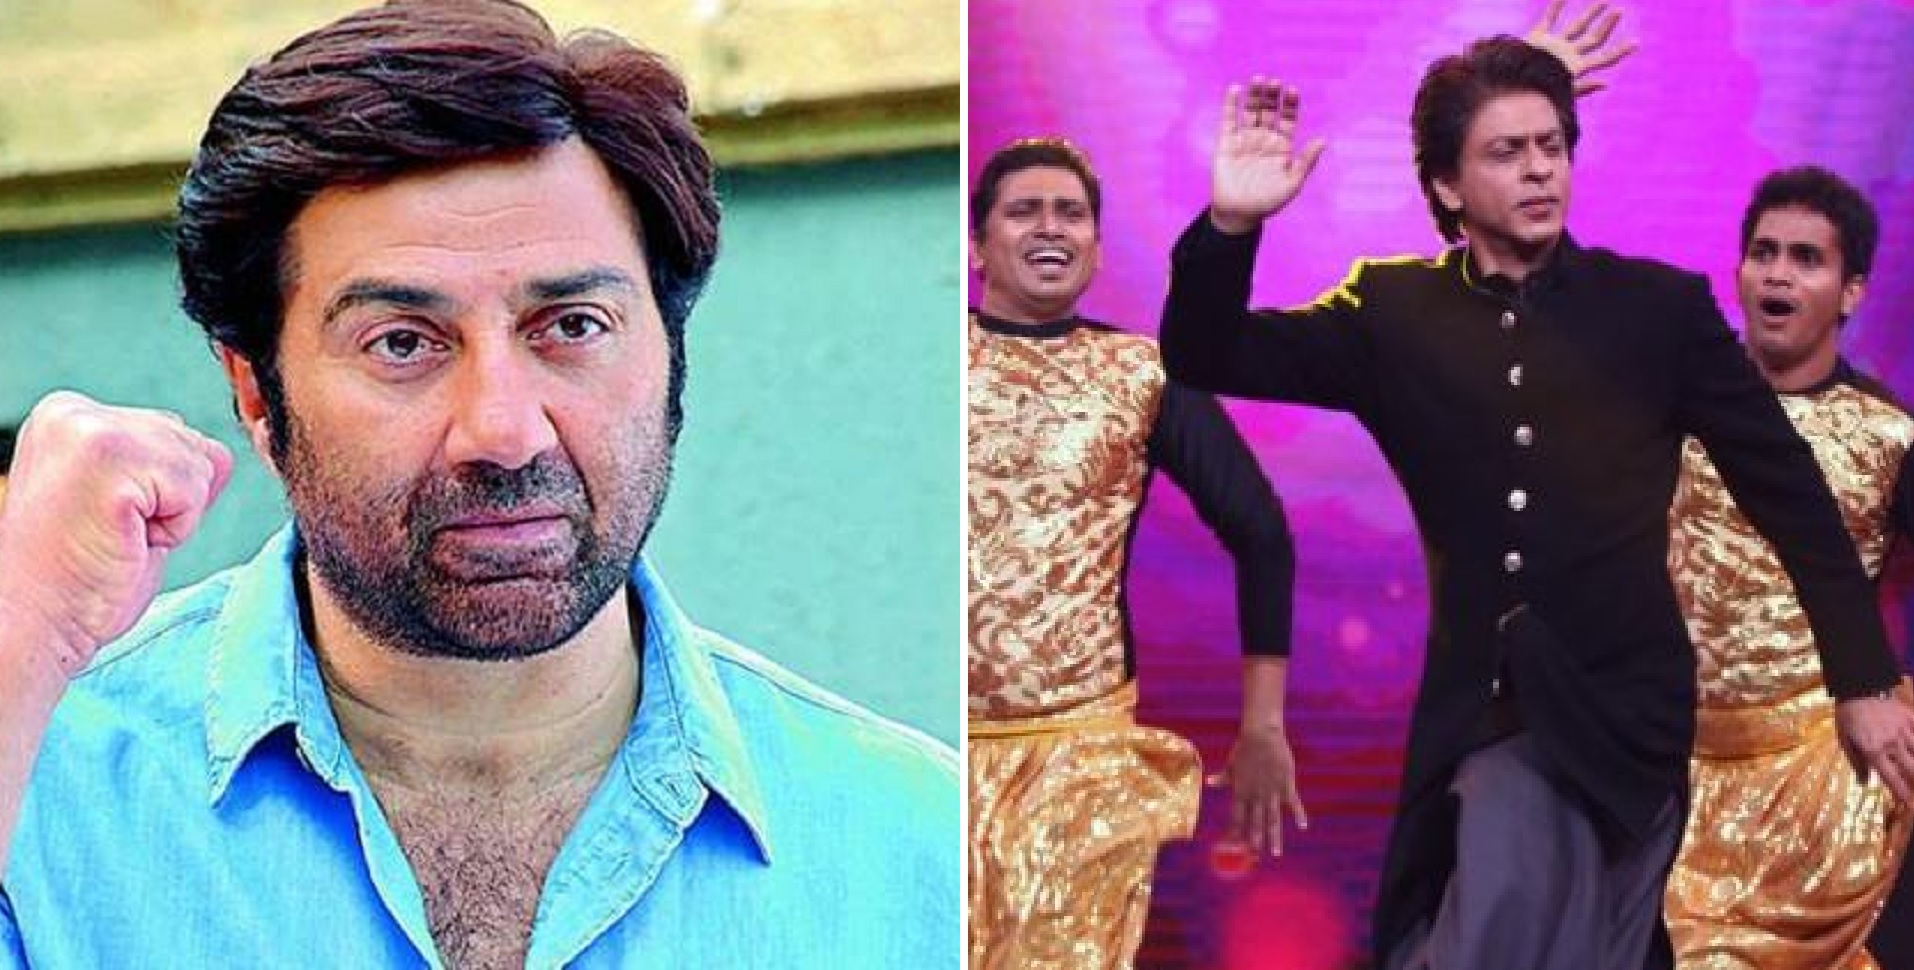 ‘Only Mujra-wallis Dance At Weddings’ Throwback When Sunny Deol Took Indirect Jibe At SRK